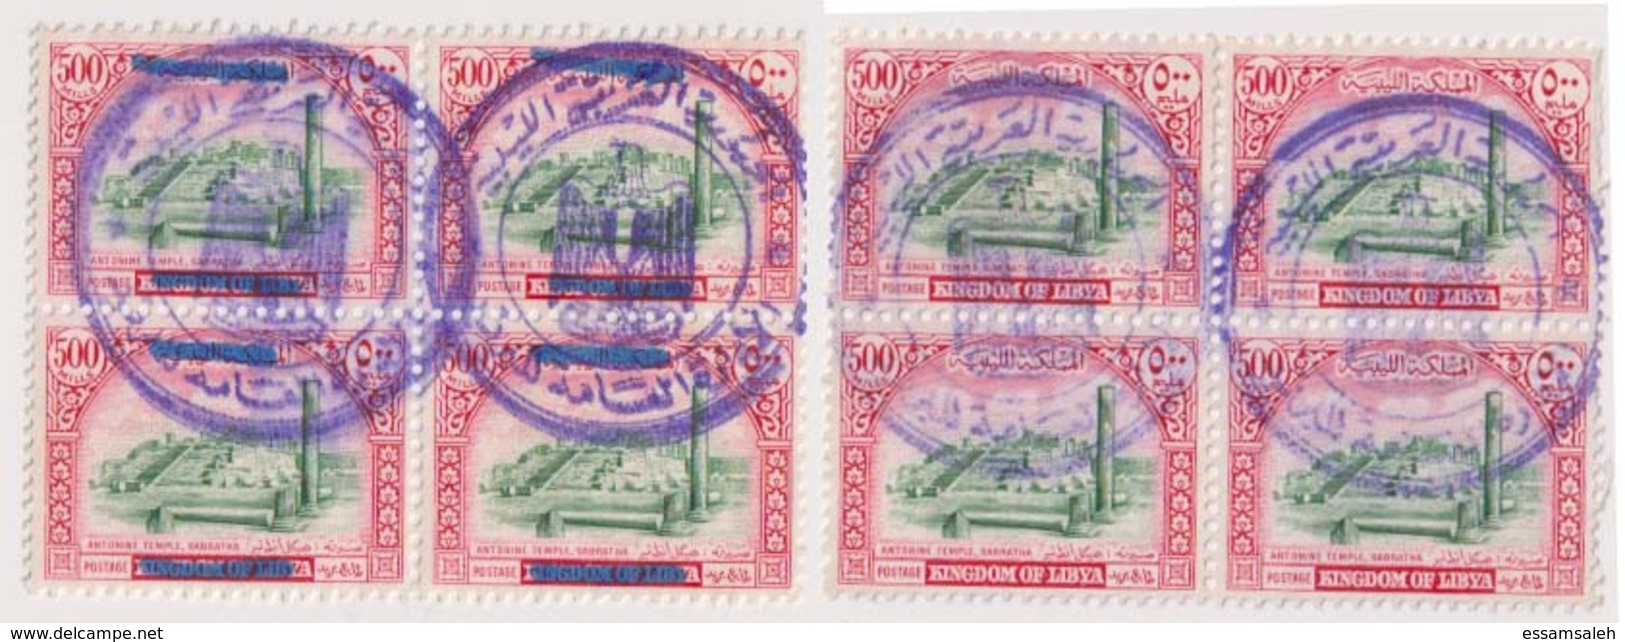 LYS05511 Republic Of Libya On Kingdom 2 Blocks One Only Surcharged With Bar - Used - Libia